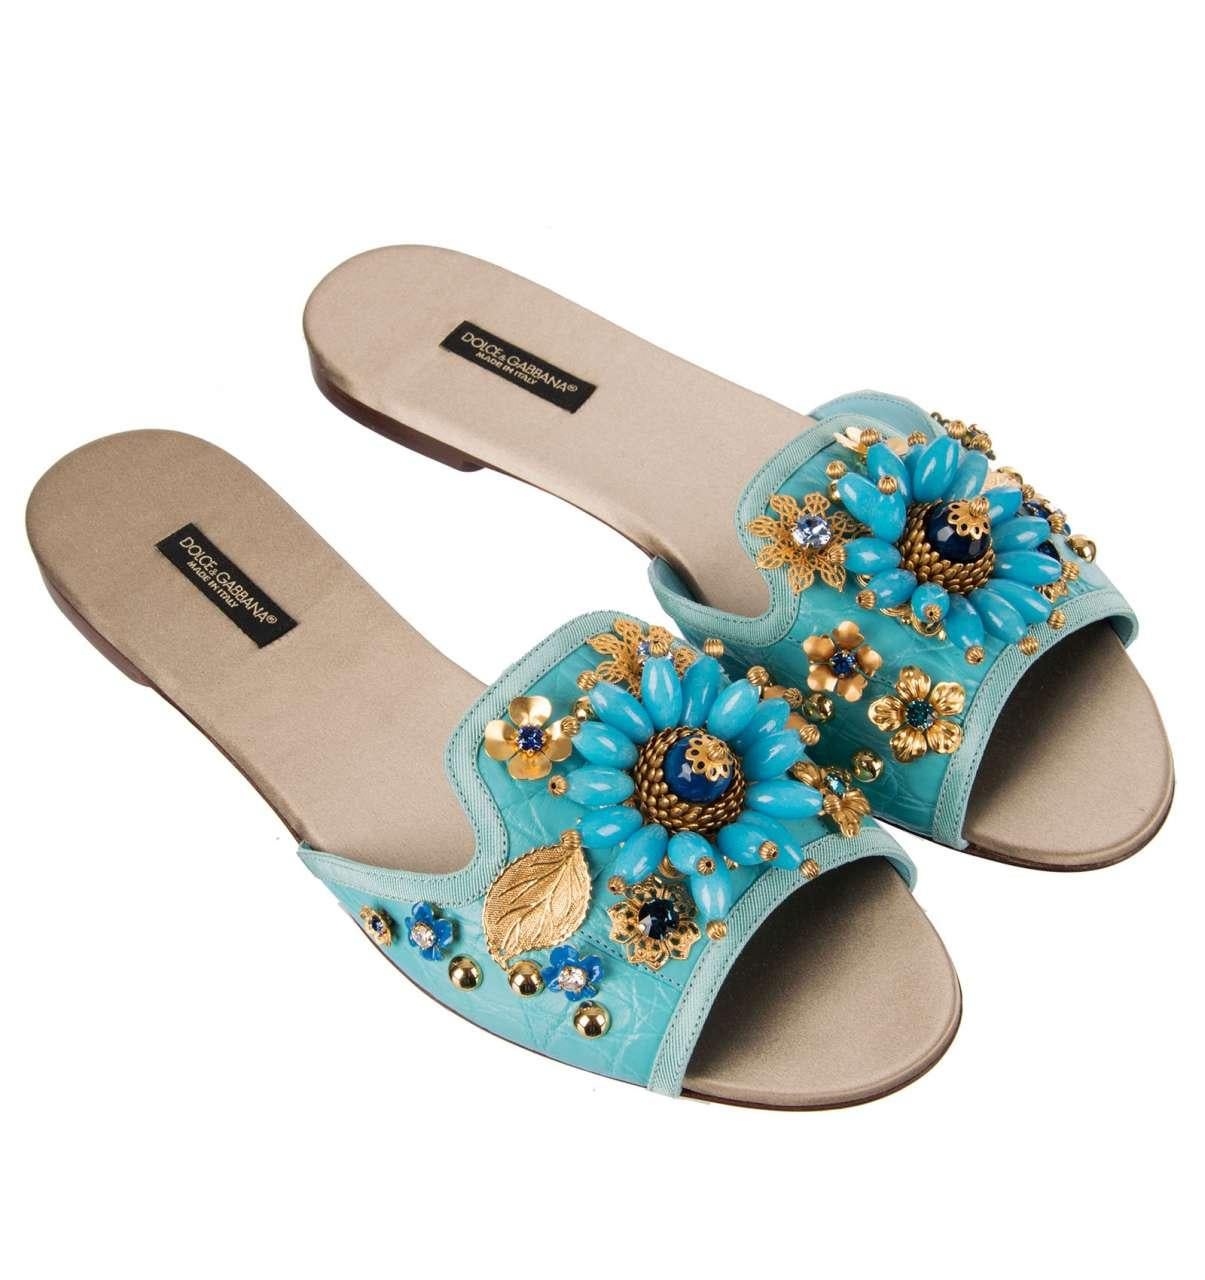 Dolce & Gabbana Jeweled Caiman Leather Sandals BIANCA with Crystals Blue EUR 36 For Sale